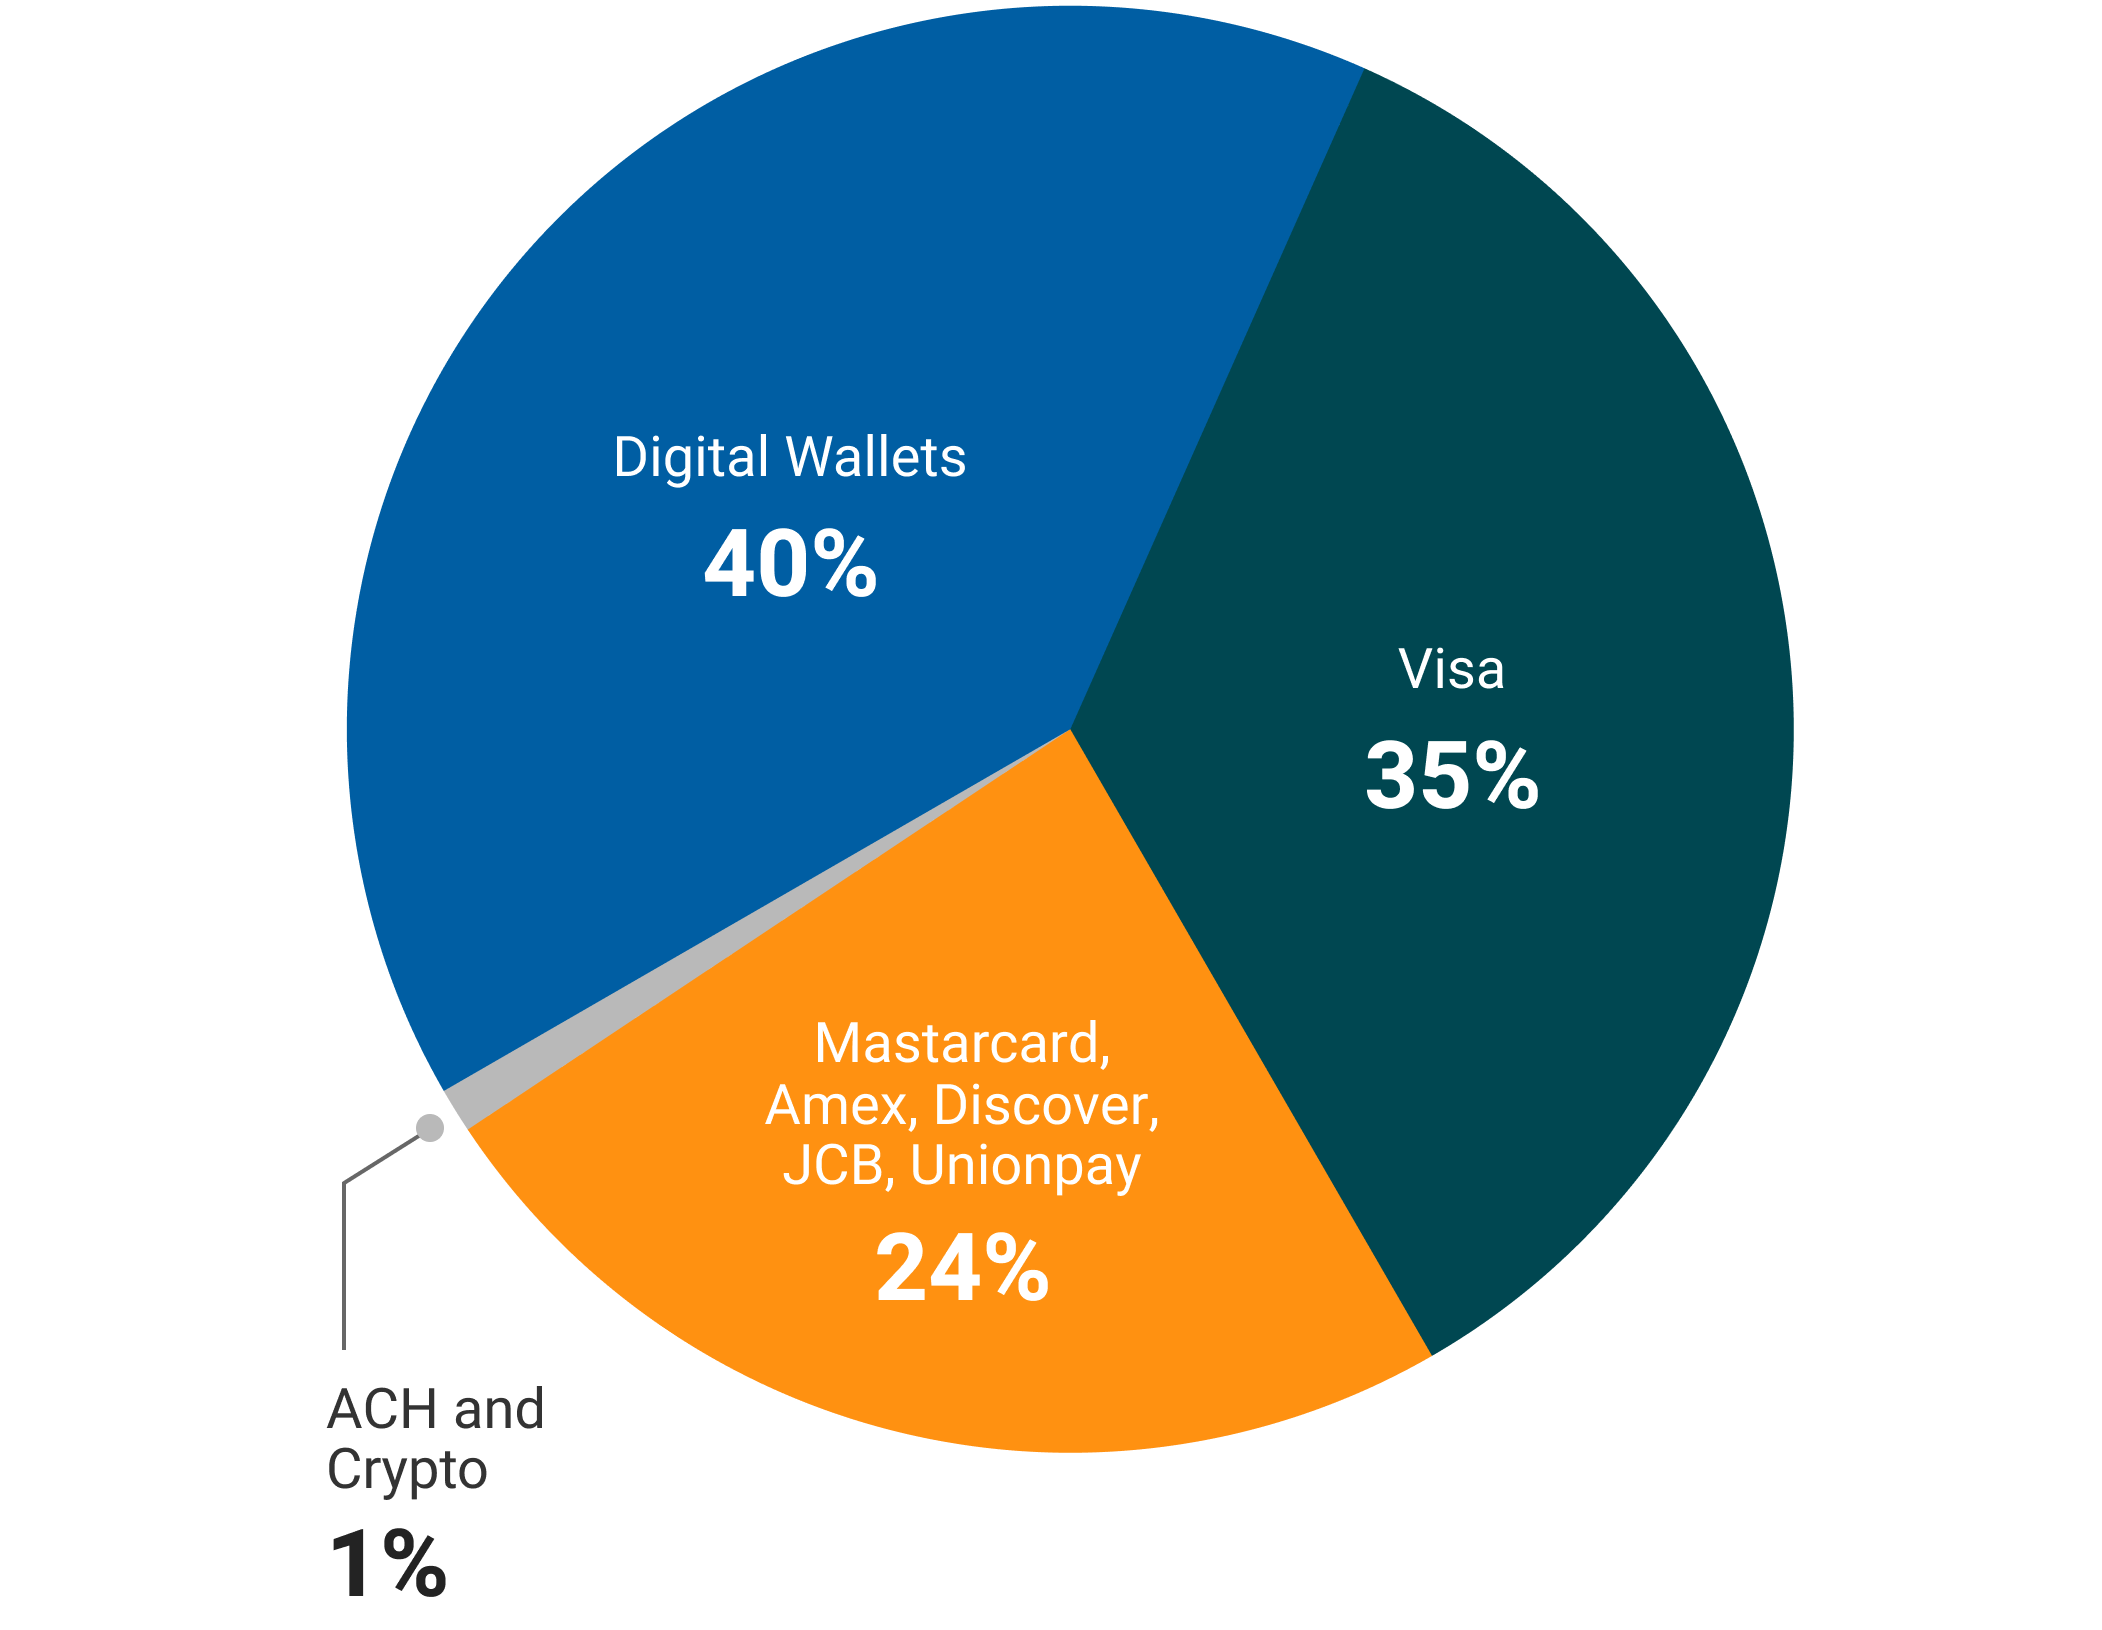 Pie chart showing donor preferences: 40% digital wallets, 35% Visa, 24% other credit cards. 1% ACH and Crypto.